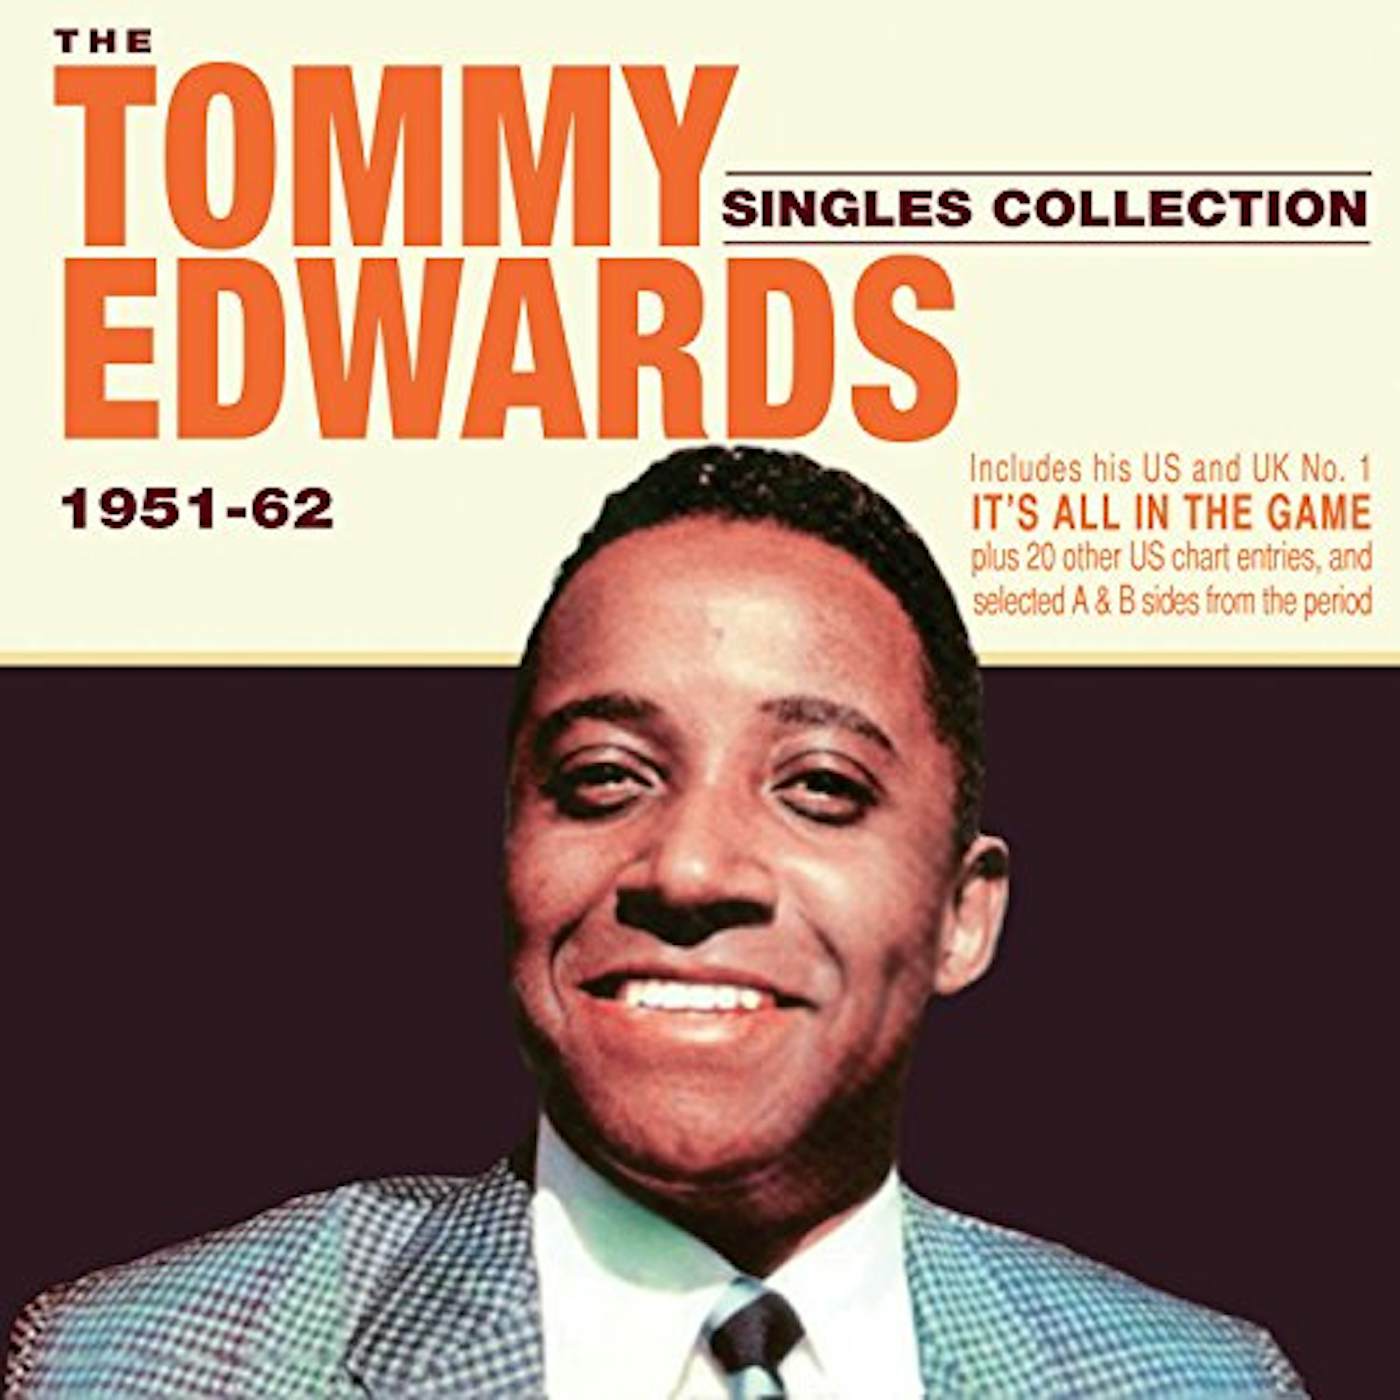 Tommy Edwards SINGLES COLLECTION 1951-62 CD